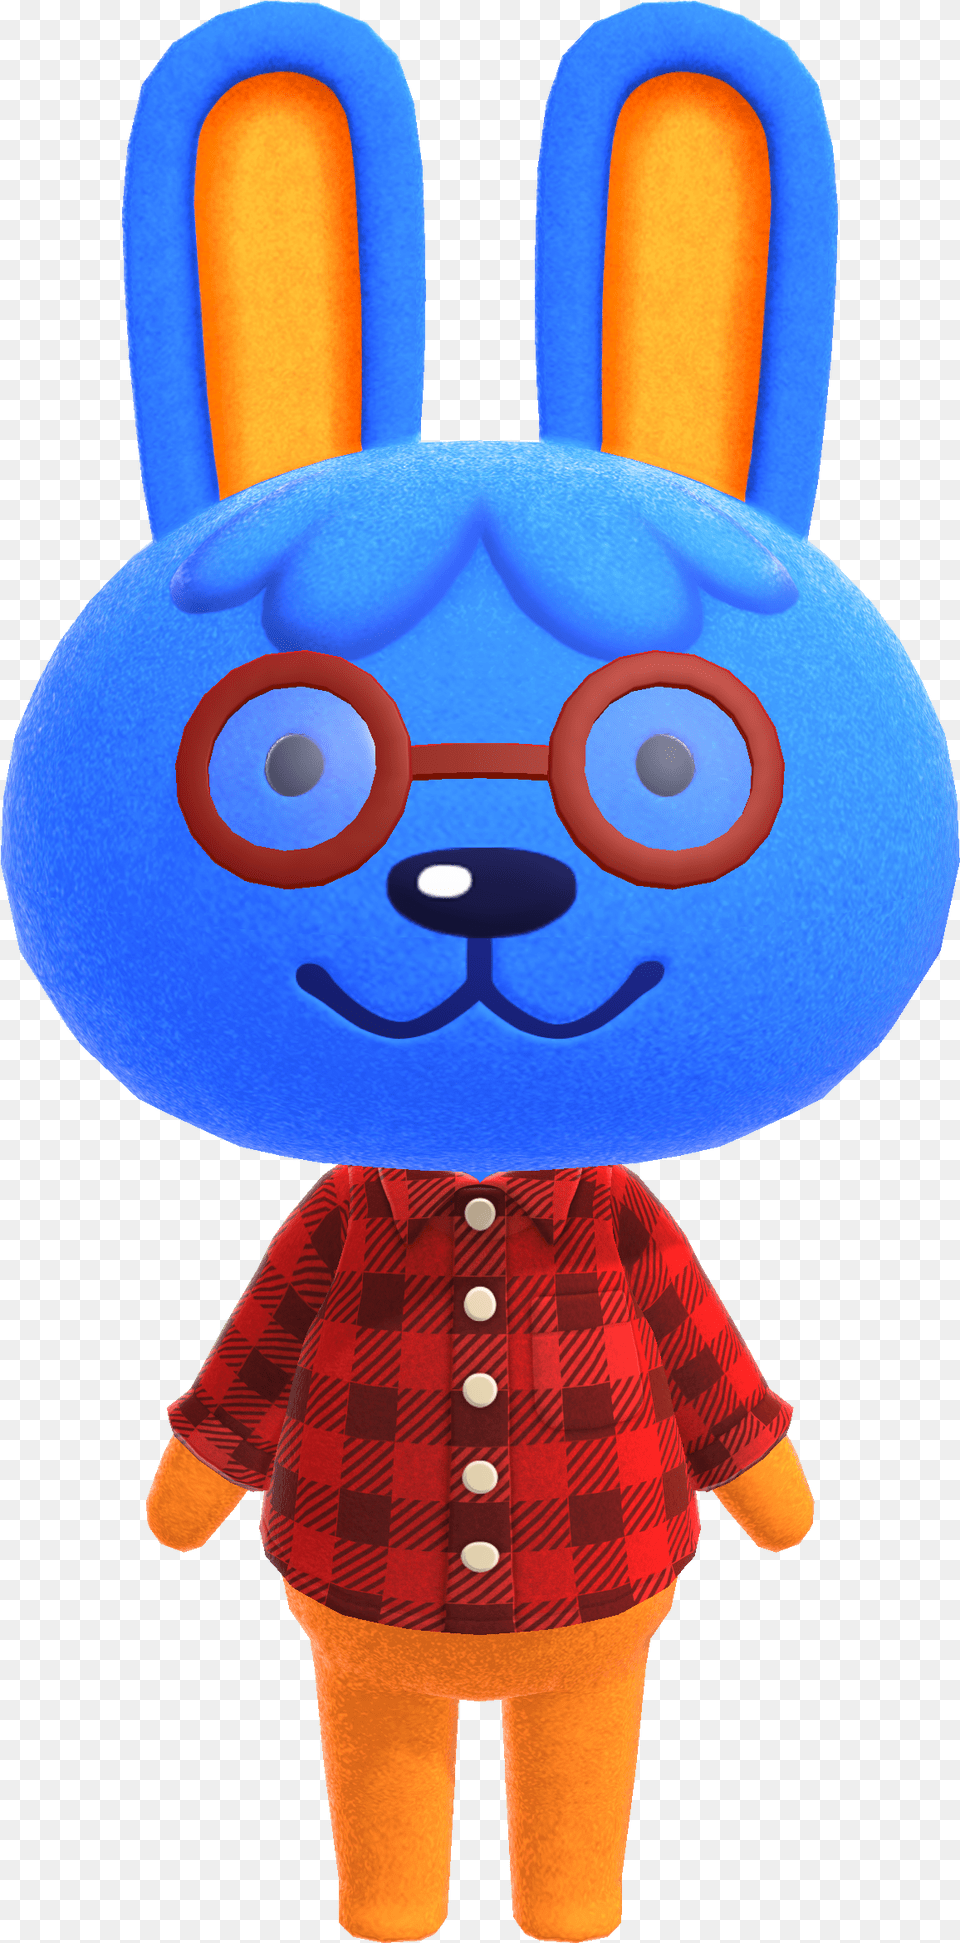 Doc Animal Crossing Wiki Nookipedia Doc Animal Crossing, Plush, Toy, Clothing, Skirt Free Transparent Png